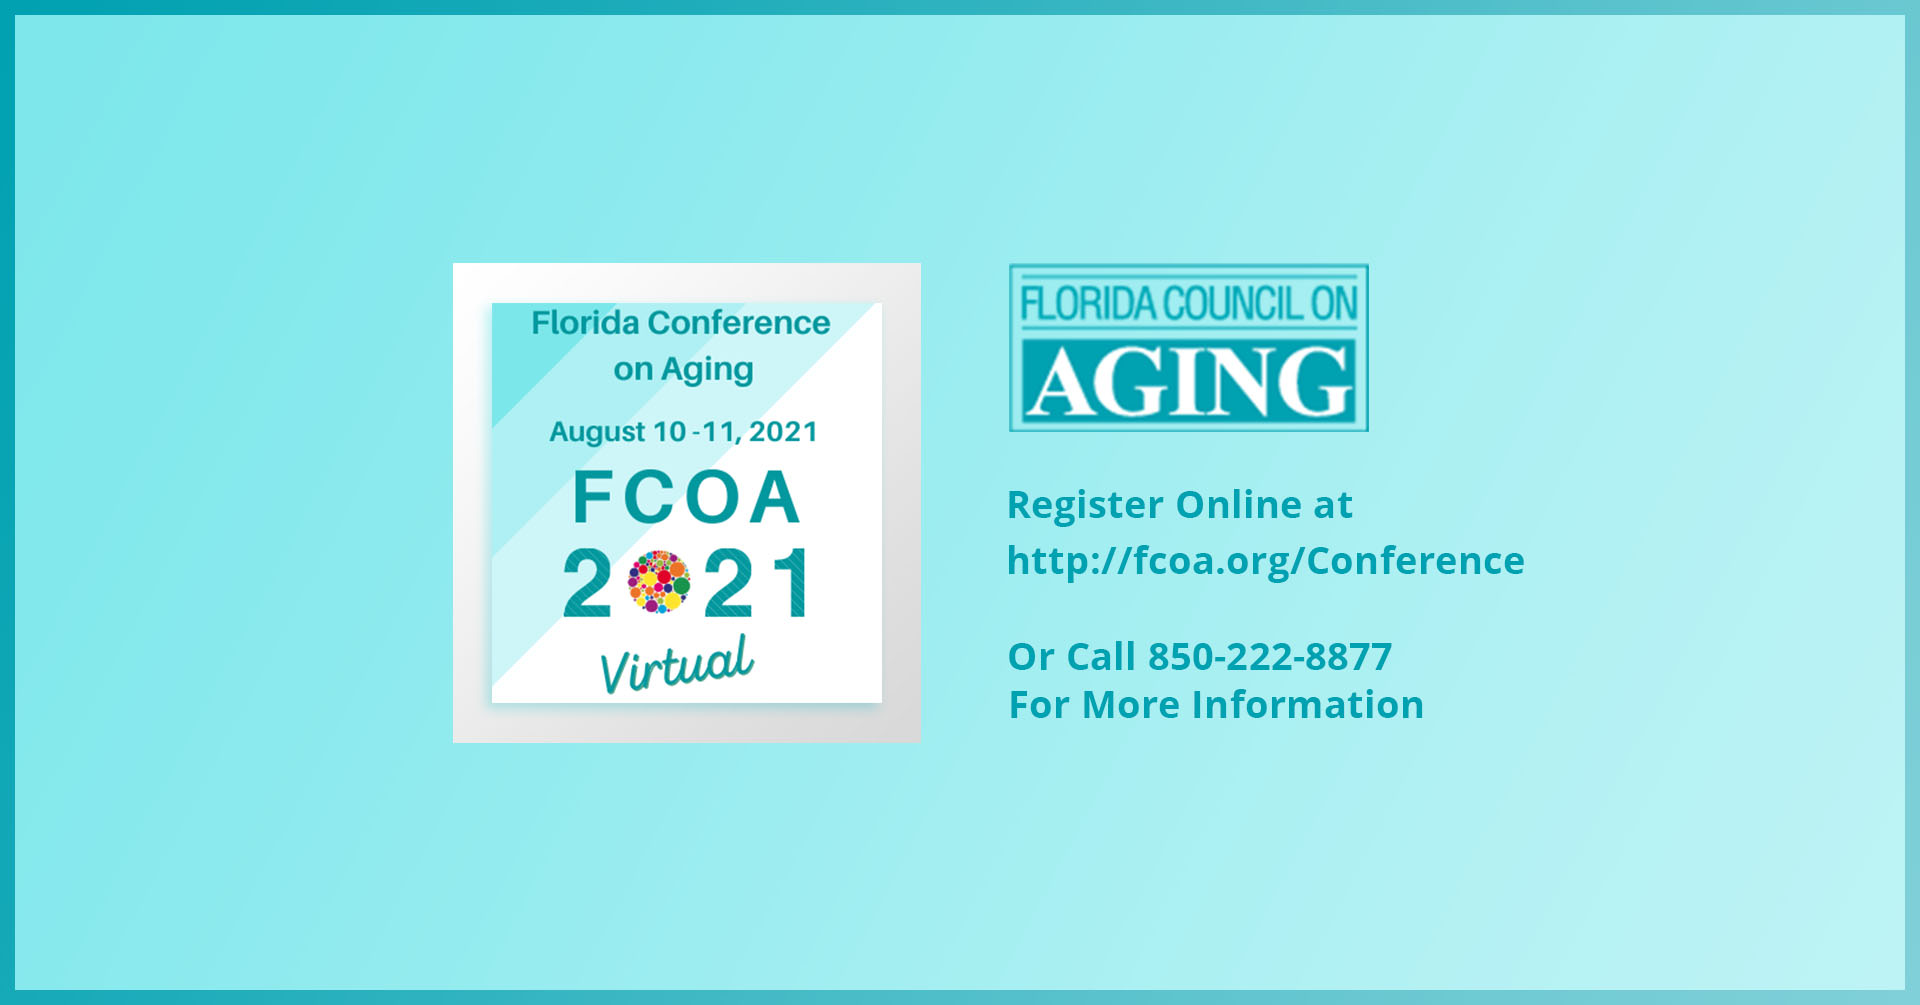 Florida Council on Aging Florida Conference on Aging Registration